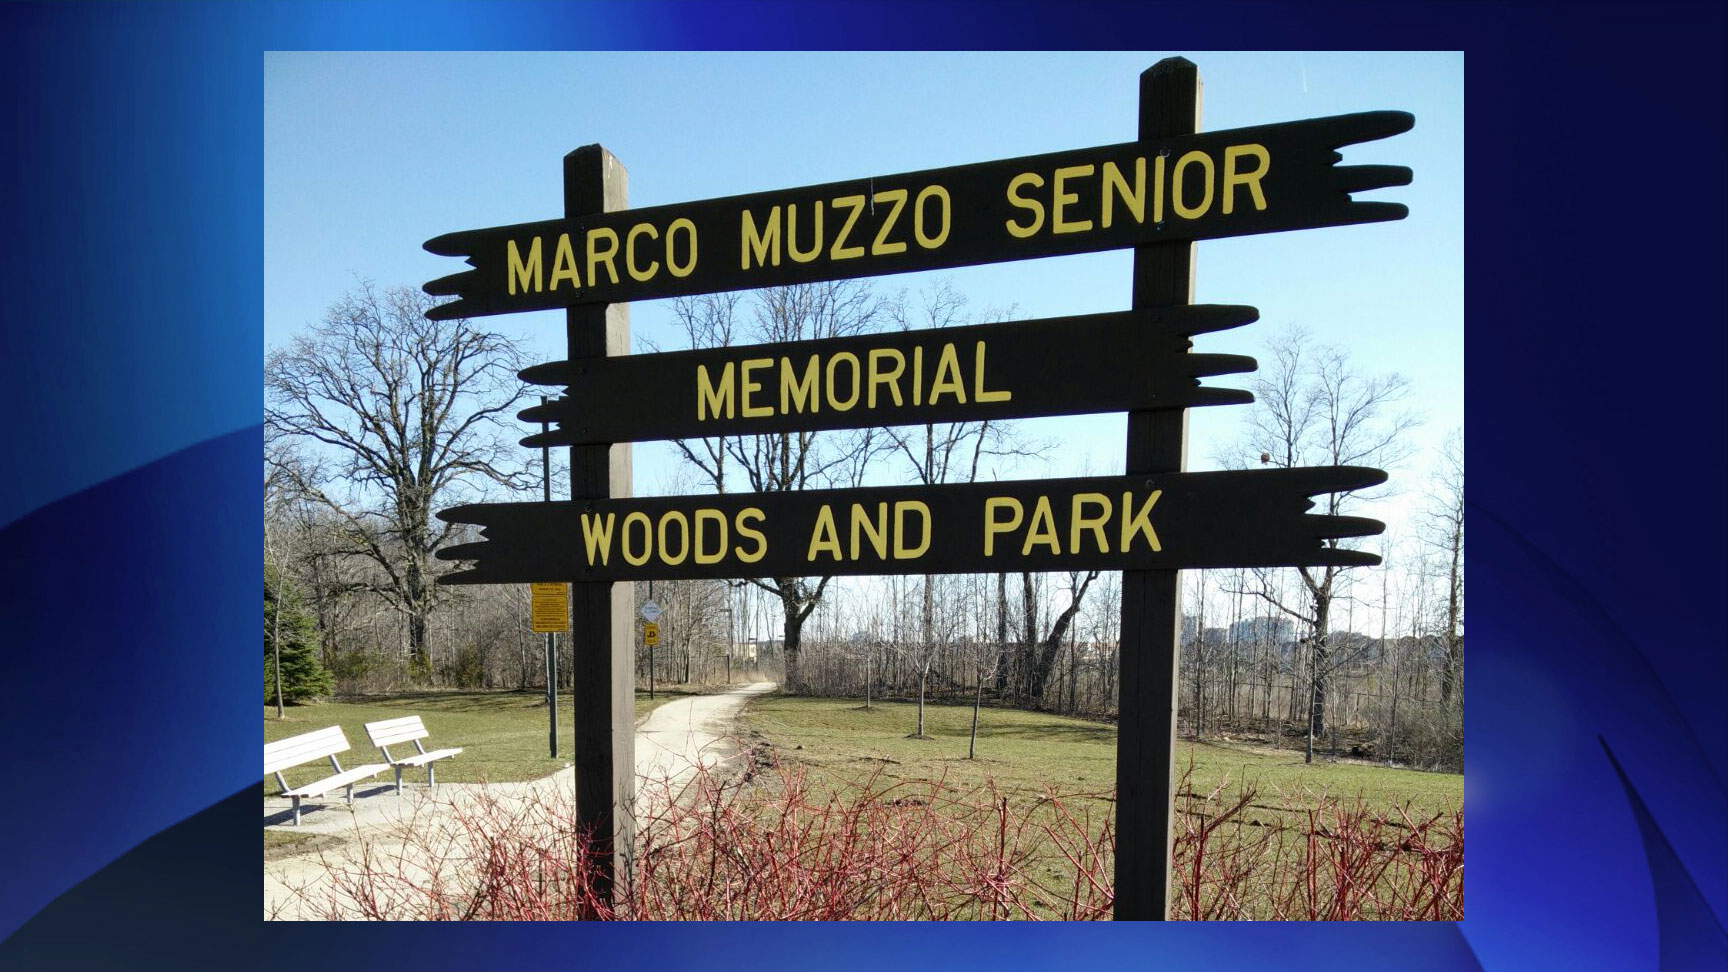 Mississauga renames Marco Muzzo park, new sign reflects change